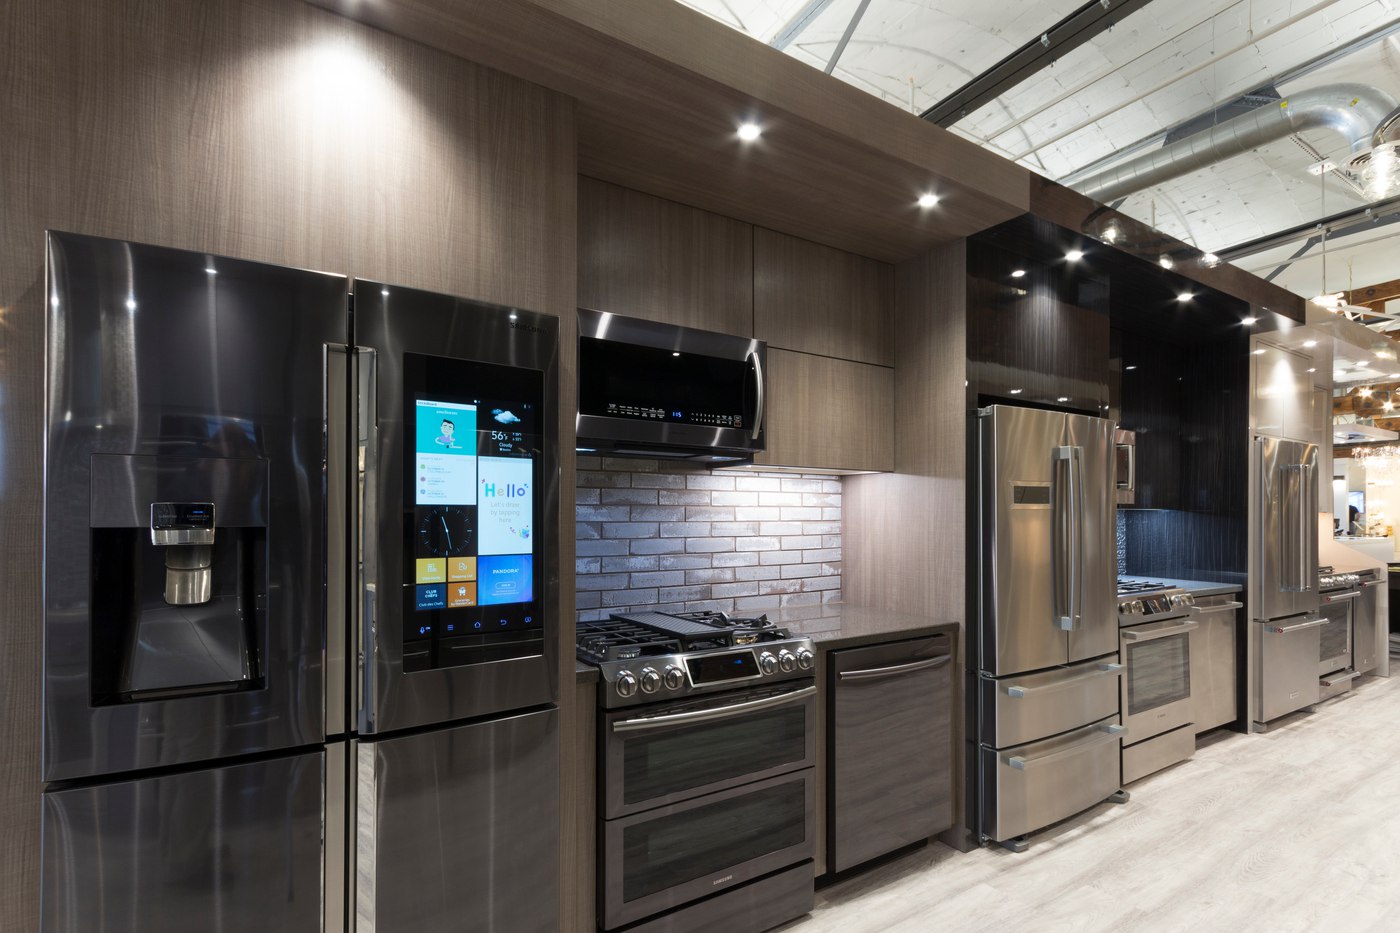 Samsung vs. LG Stainless Kitchen Packages